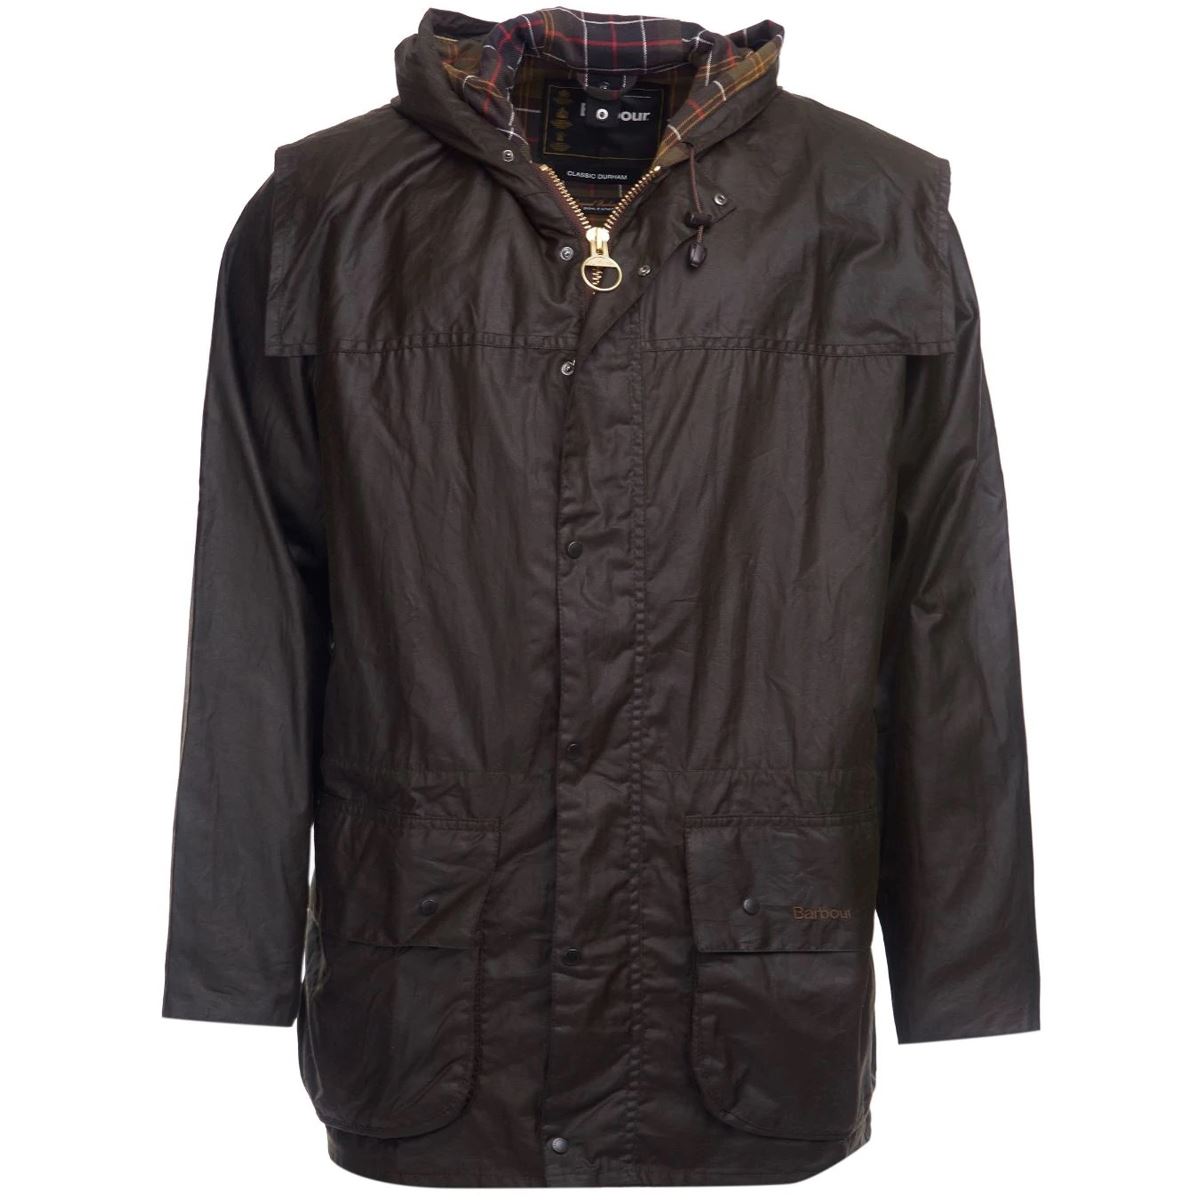 How to preserve weather resistance of the Barbour Durham Jacket?